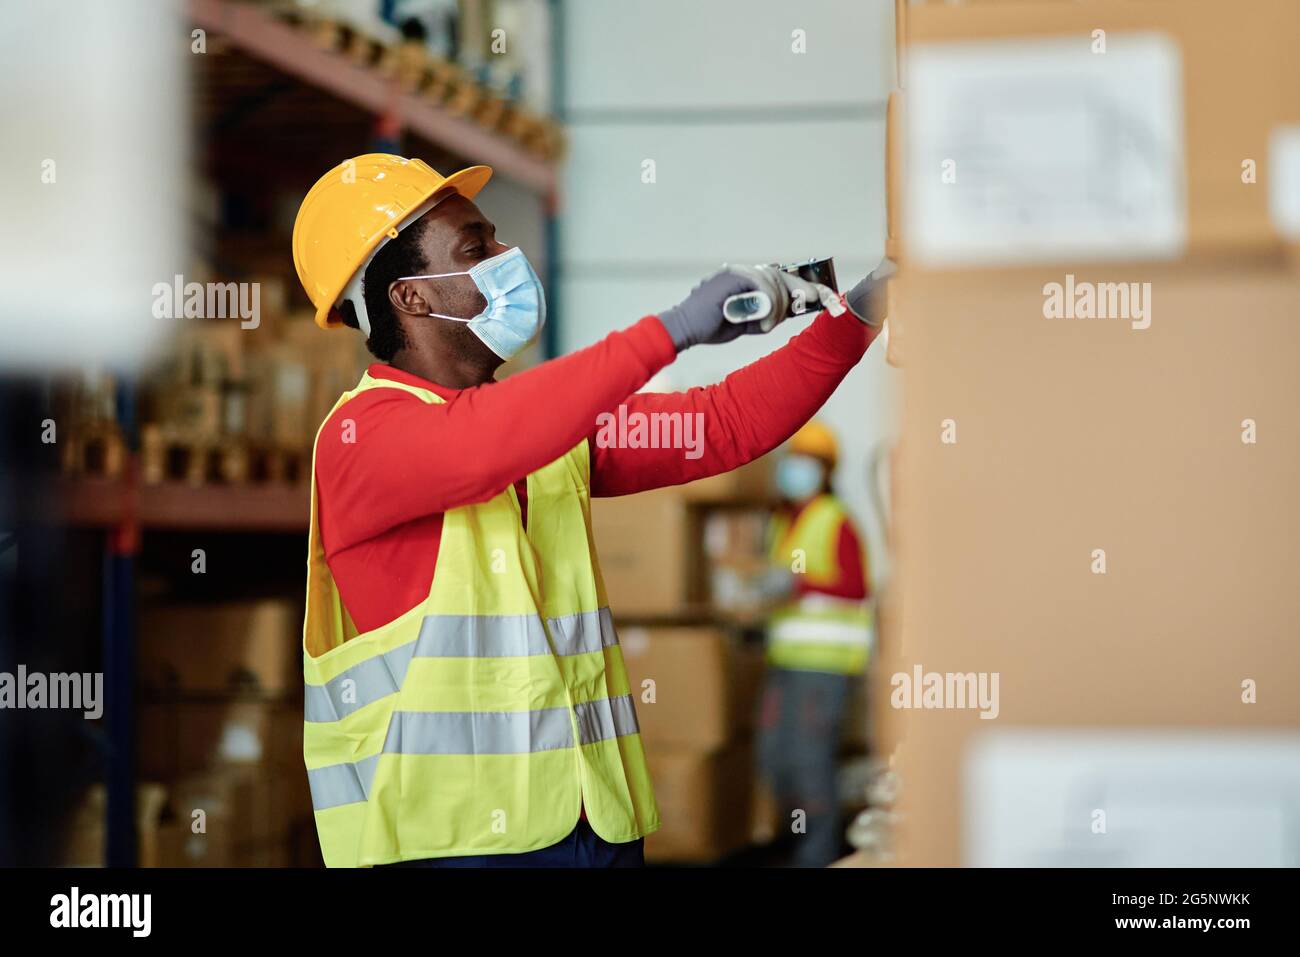 Black male worker scanning boxes in warehouse Stock Photo